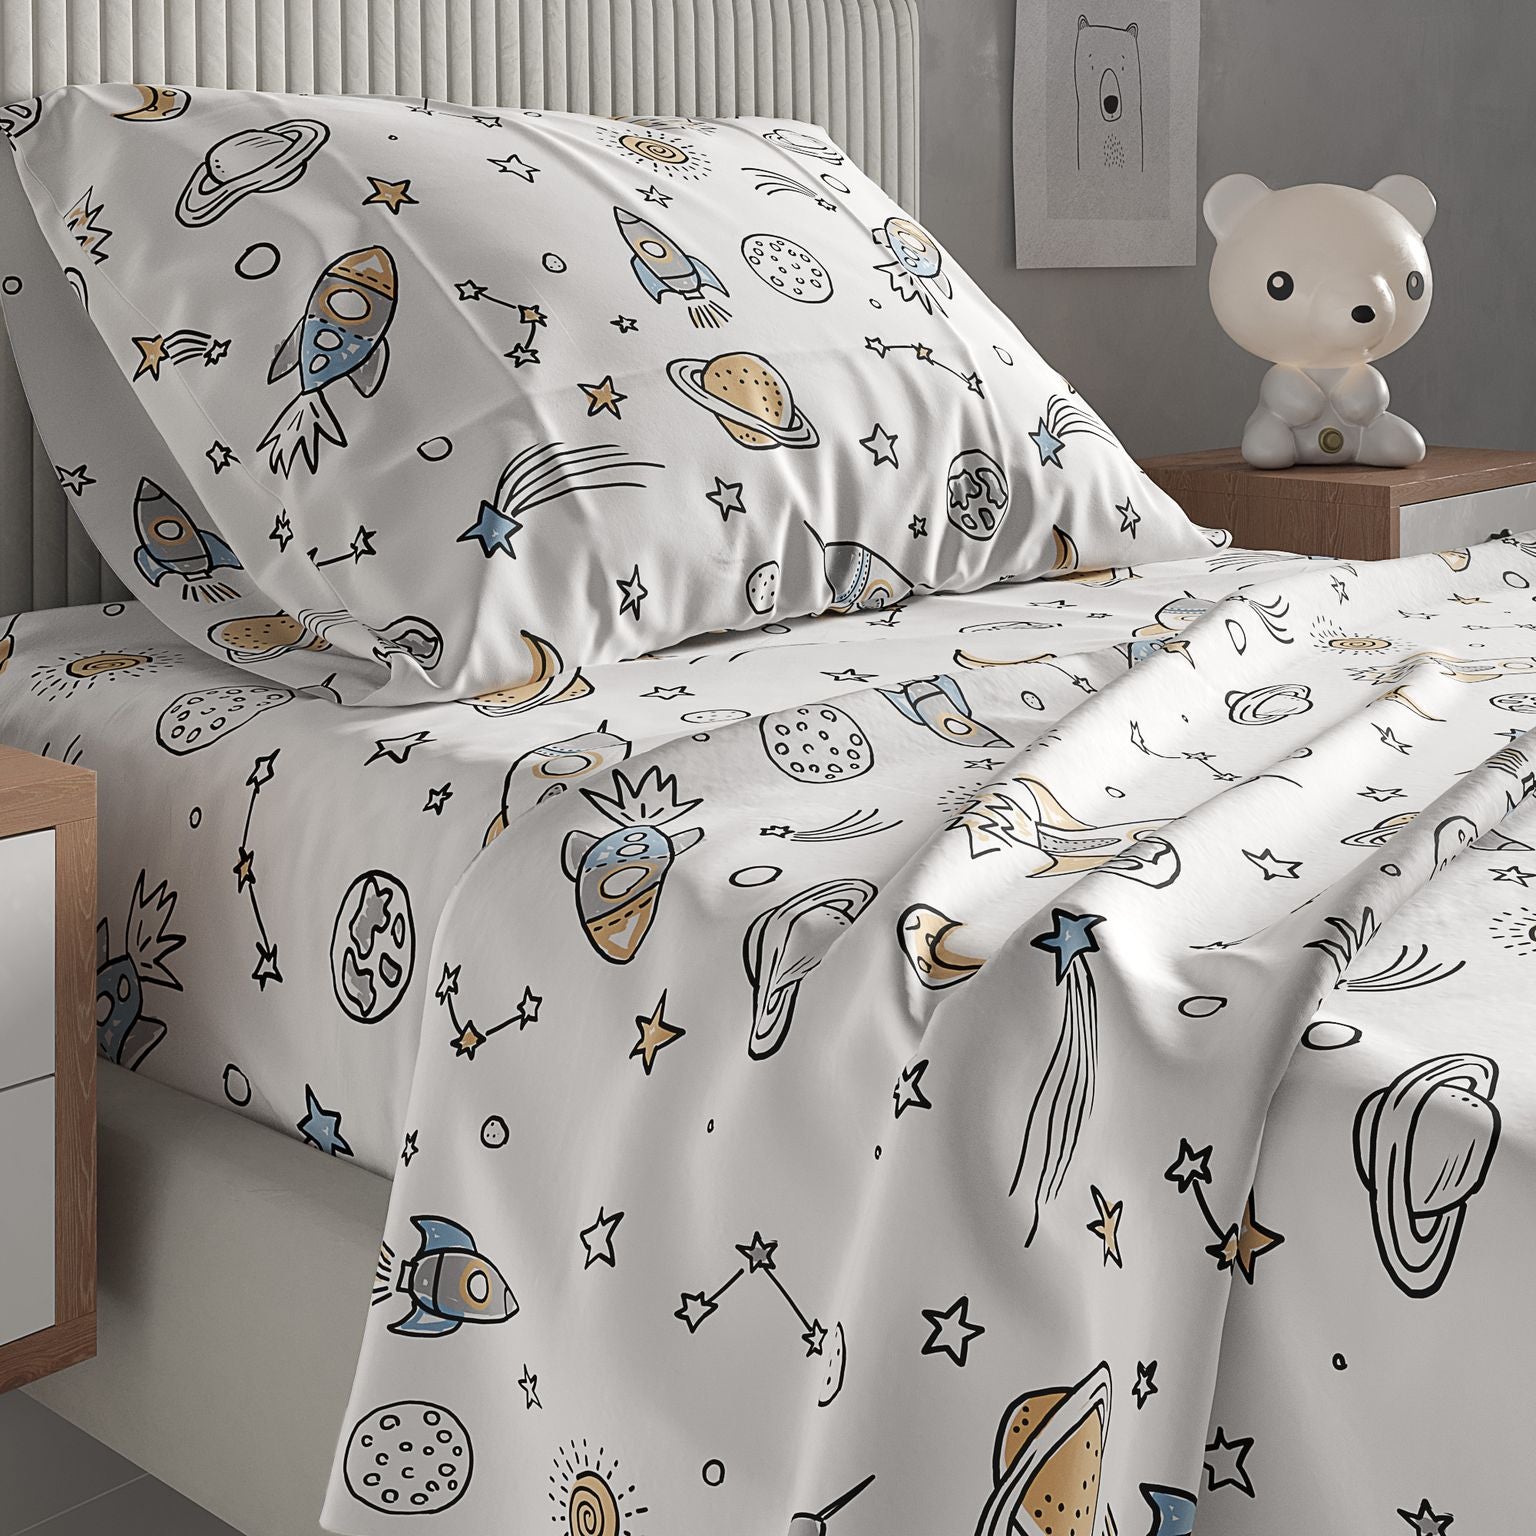 tes New Kids Sheet Set - Outer Space